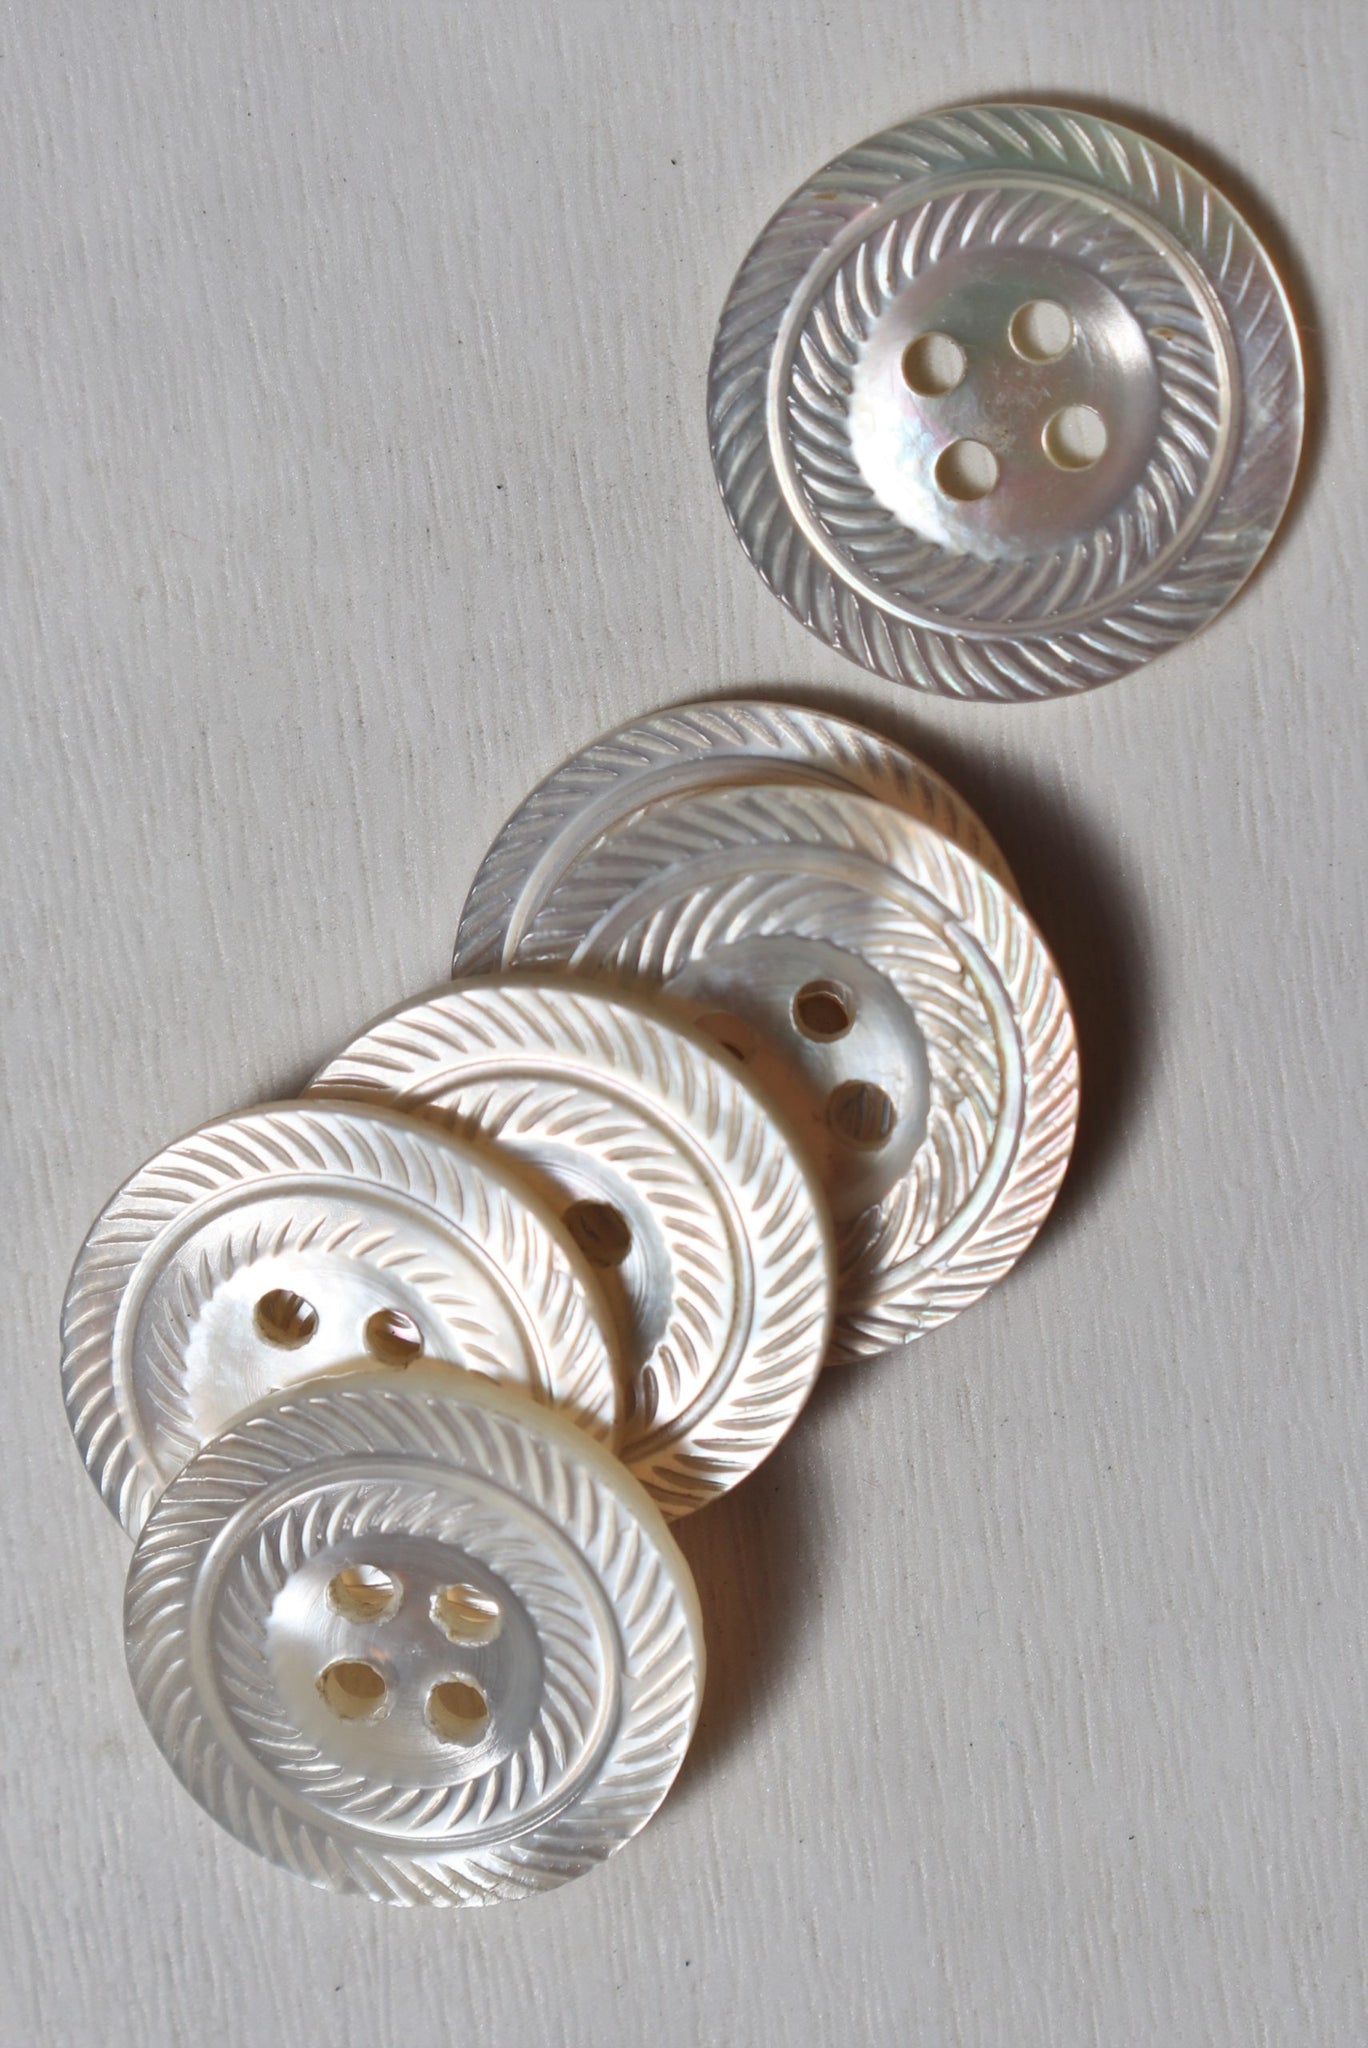 1930s Set Of 6 Diminutive Art Deco Mother Of Pearl Buttons